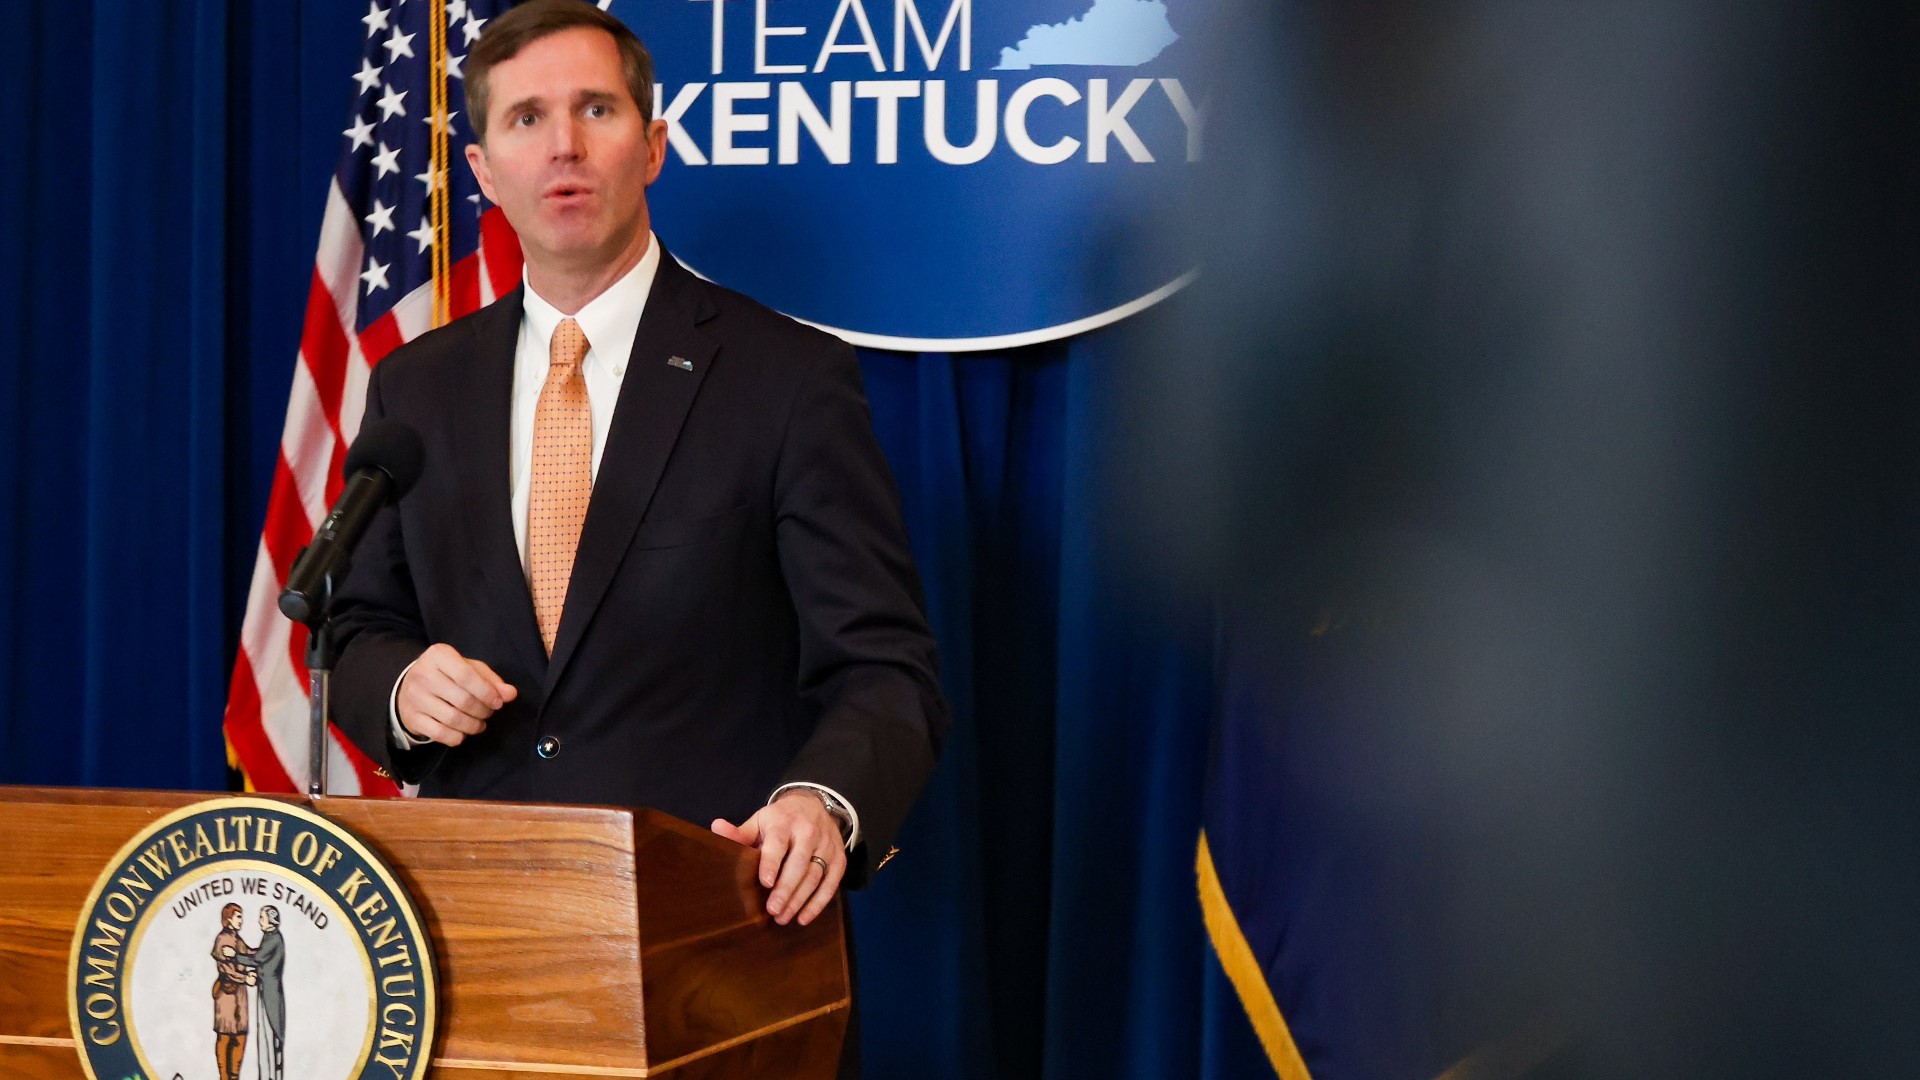 “This is the worst forecast I’ve seen as Governor. I am declaring a state of emergency so that we can be prepared," Beshear said.